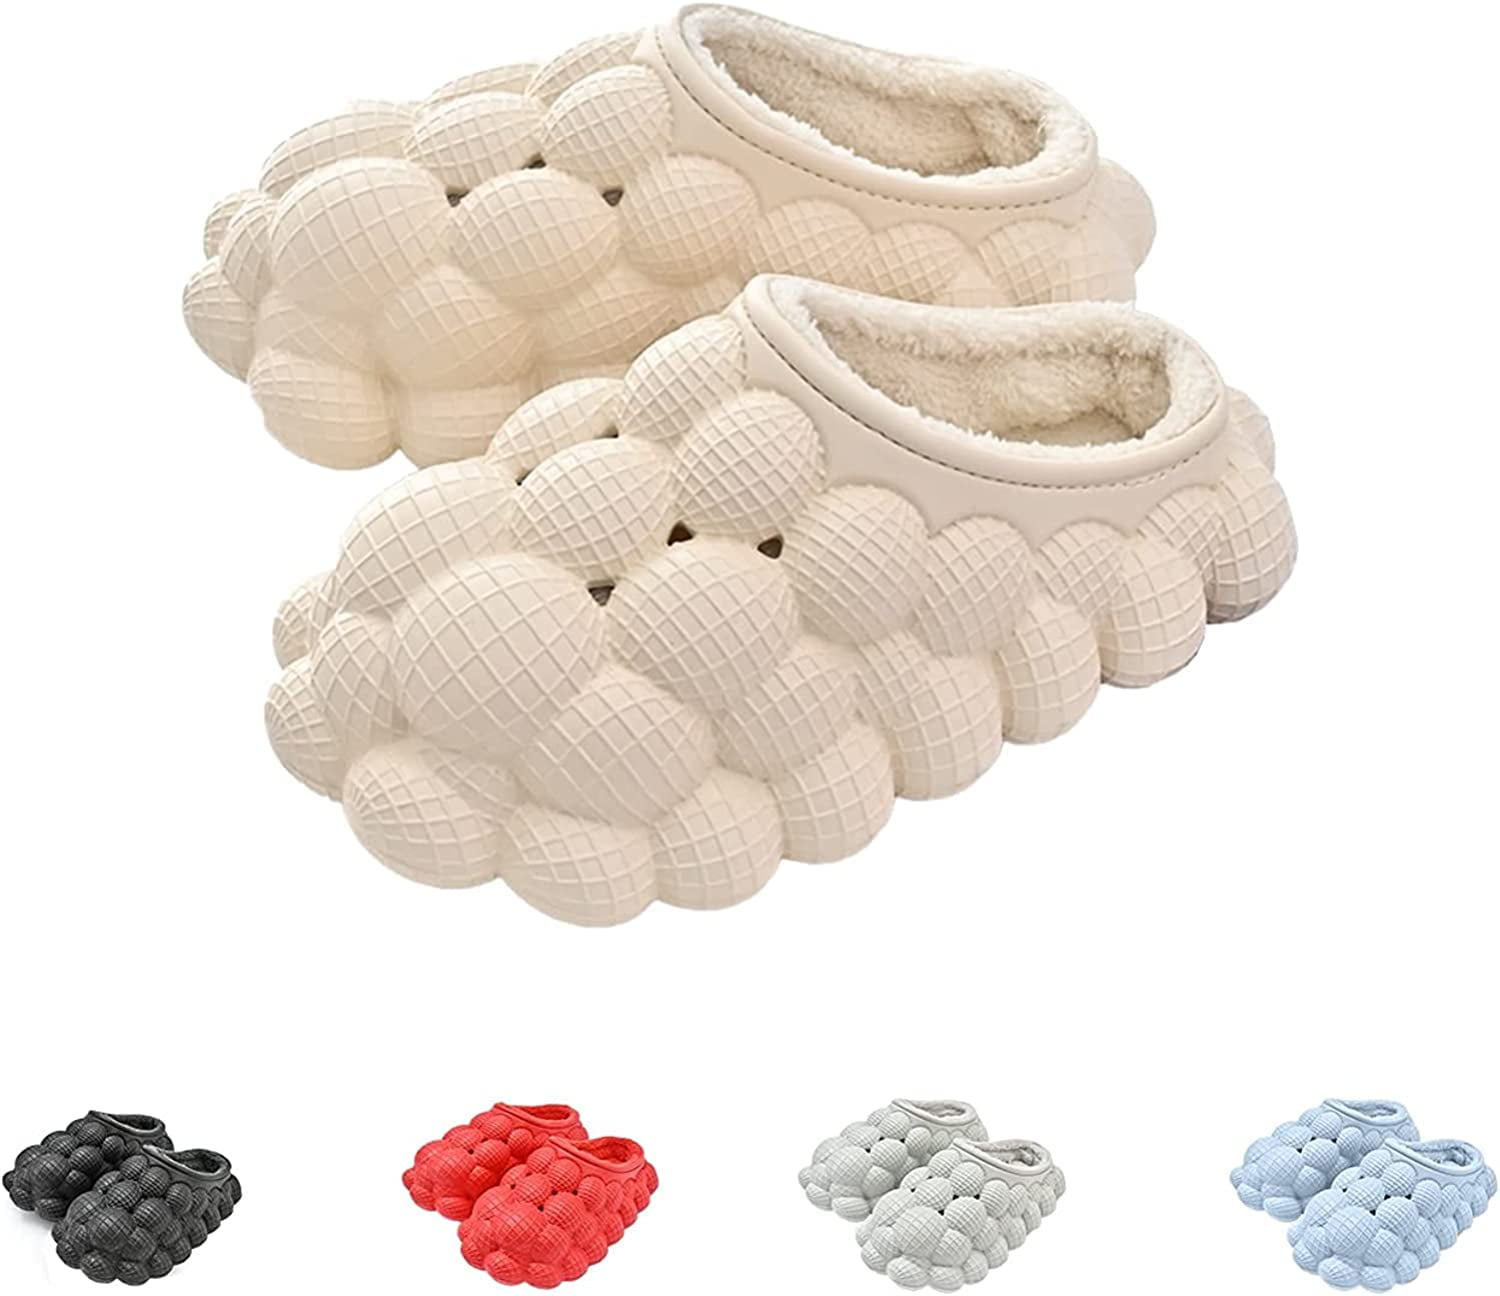 Bubble Slides For Women And Men - Golf Ball Shoes Non-Slip SPA Cloud Slippers  For Women Soft Pillow Bedroom Slippers For Men Massage Bubble Shoes Funny Slippers  For Women 